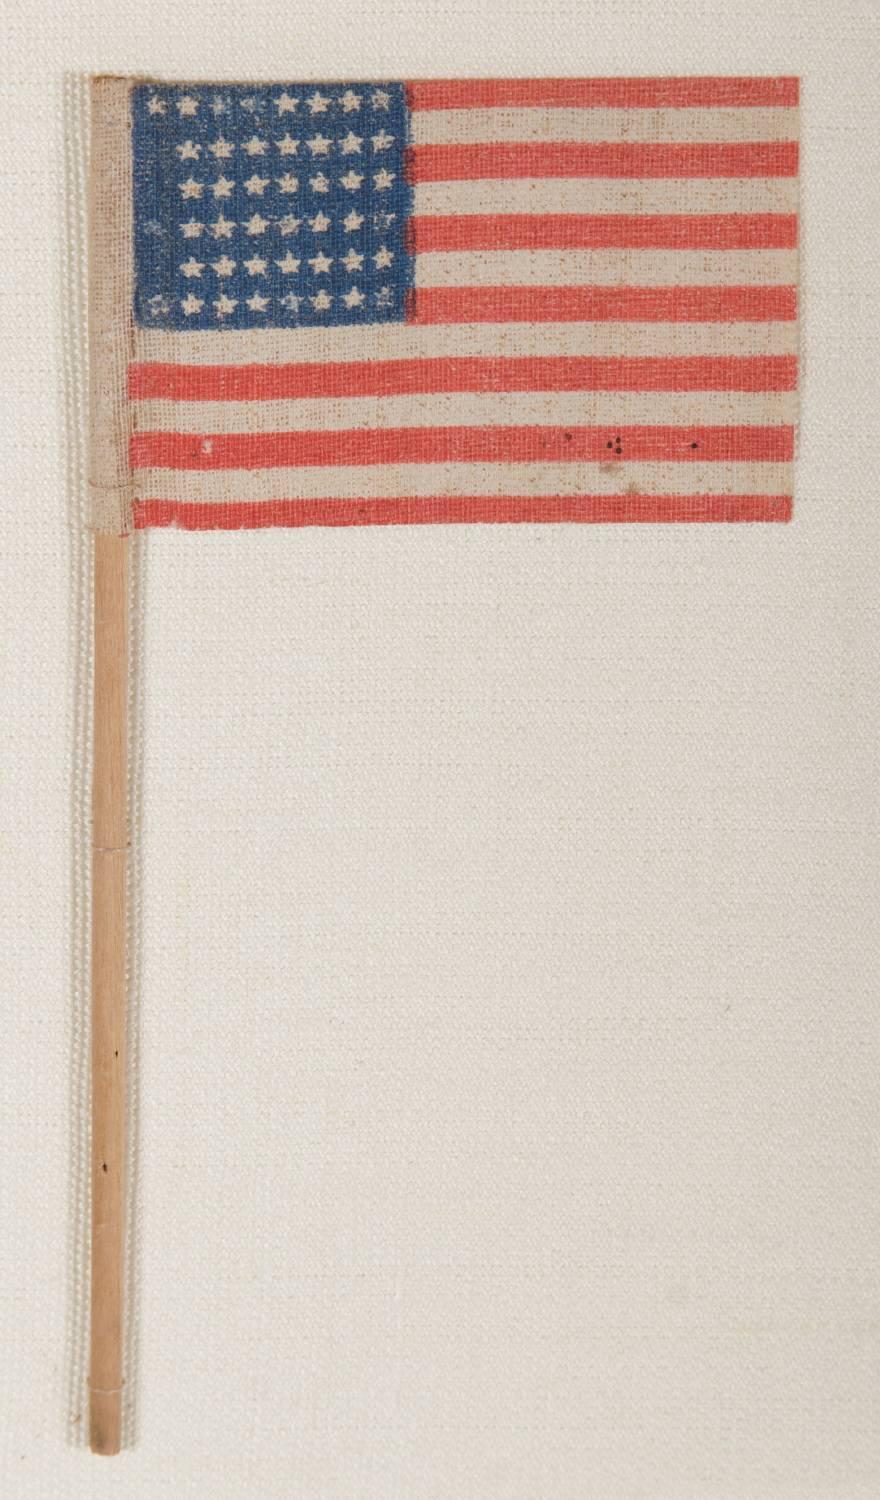 45 Stars in a "NOTCHED" Design, leaving space open for the future addition of three more western territories, Utah statehood, 1896-1908:

45 star American parade flag, printed on coarse, glazed cotton and affixed to its original wooden